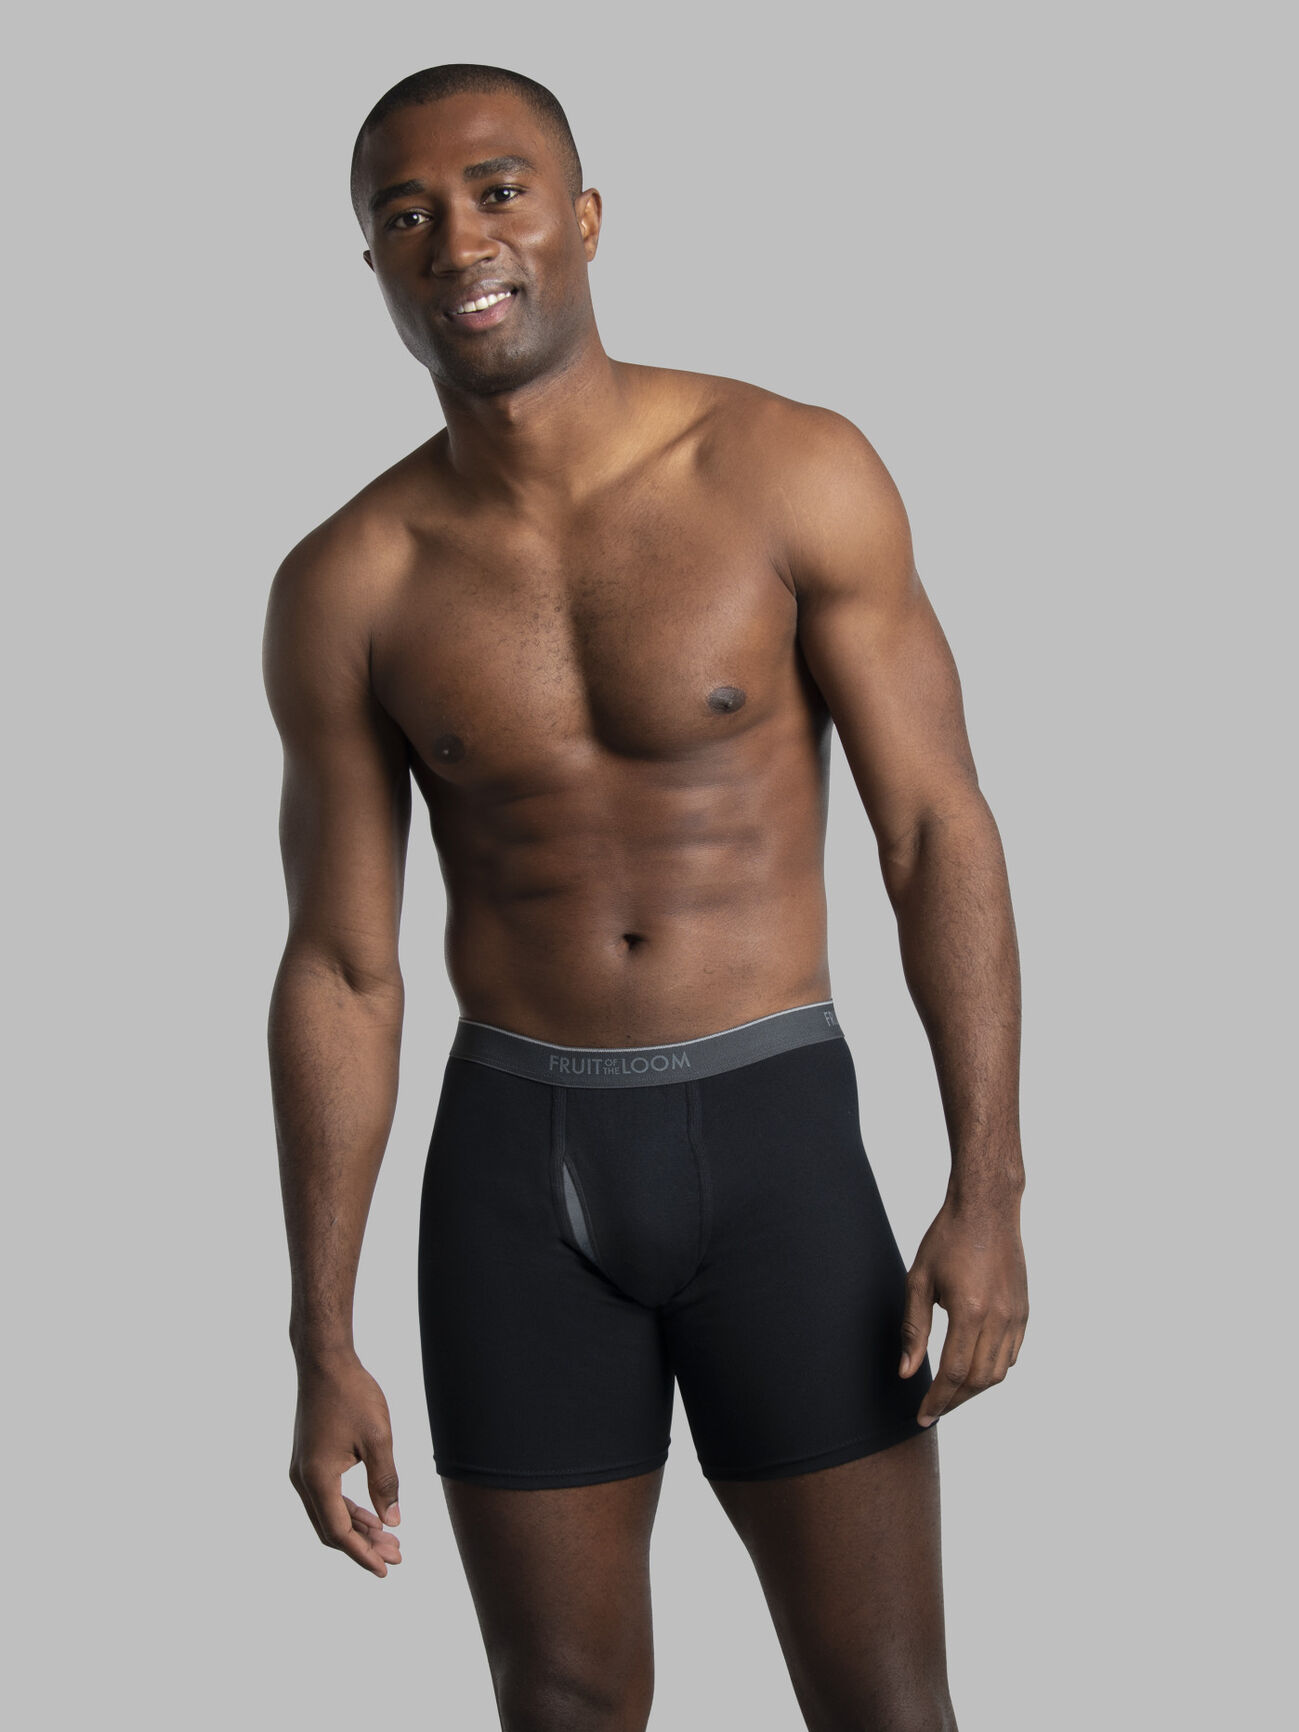 Women's Dry on the Fly Performance Briefs